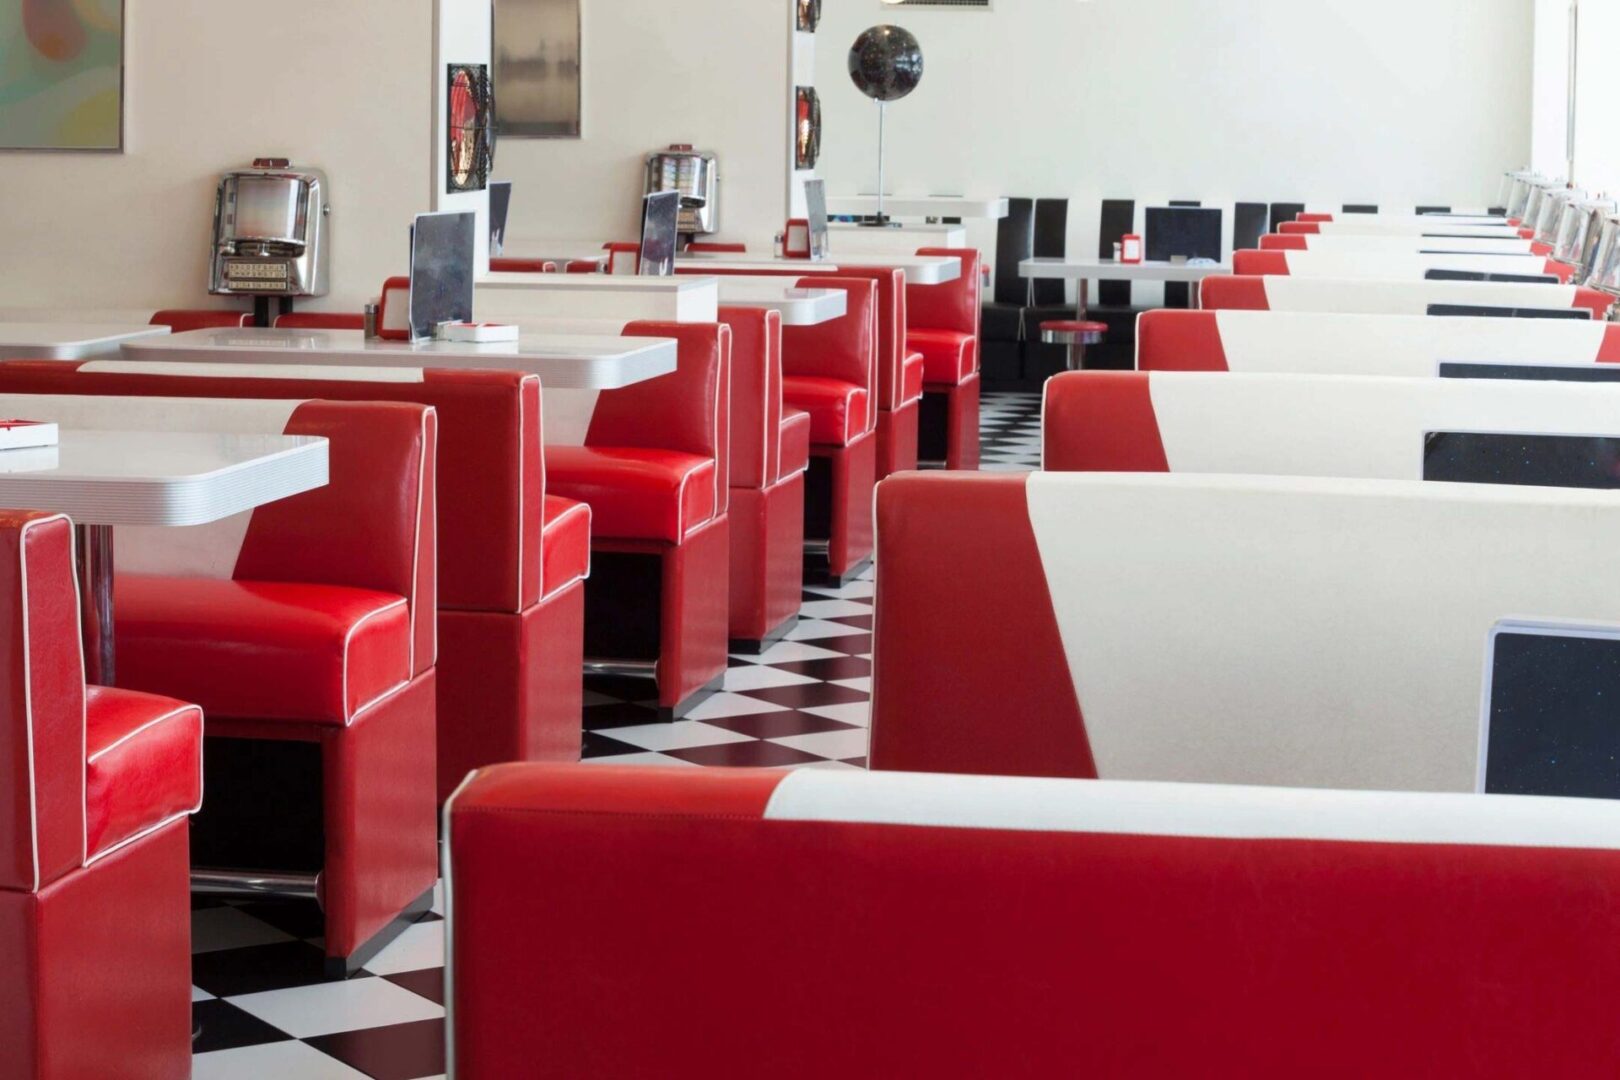 A restaurant with red booths and white tables.